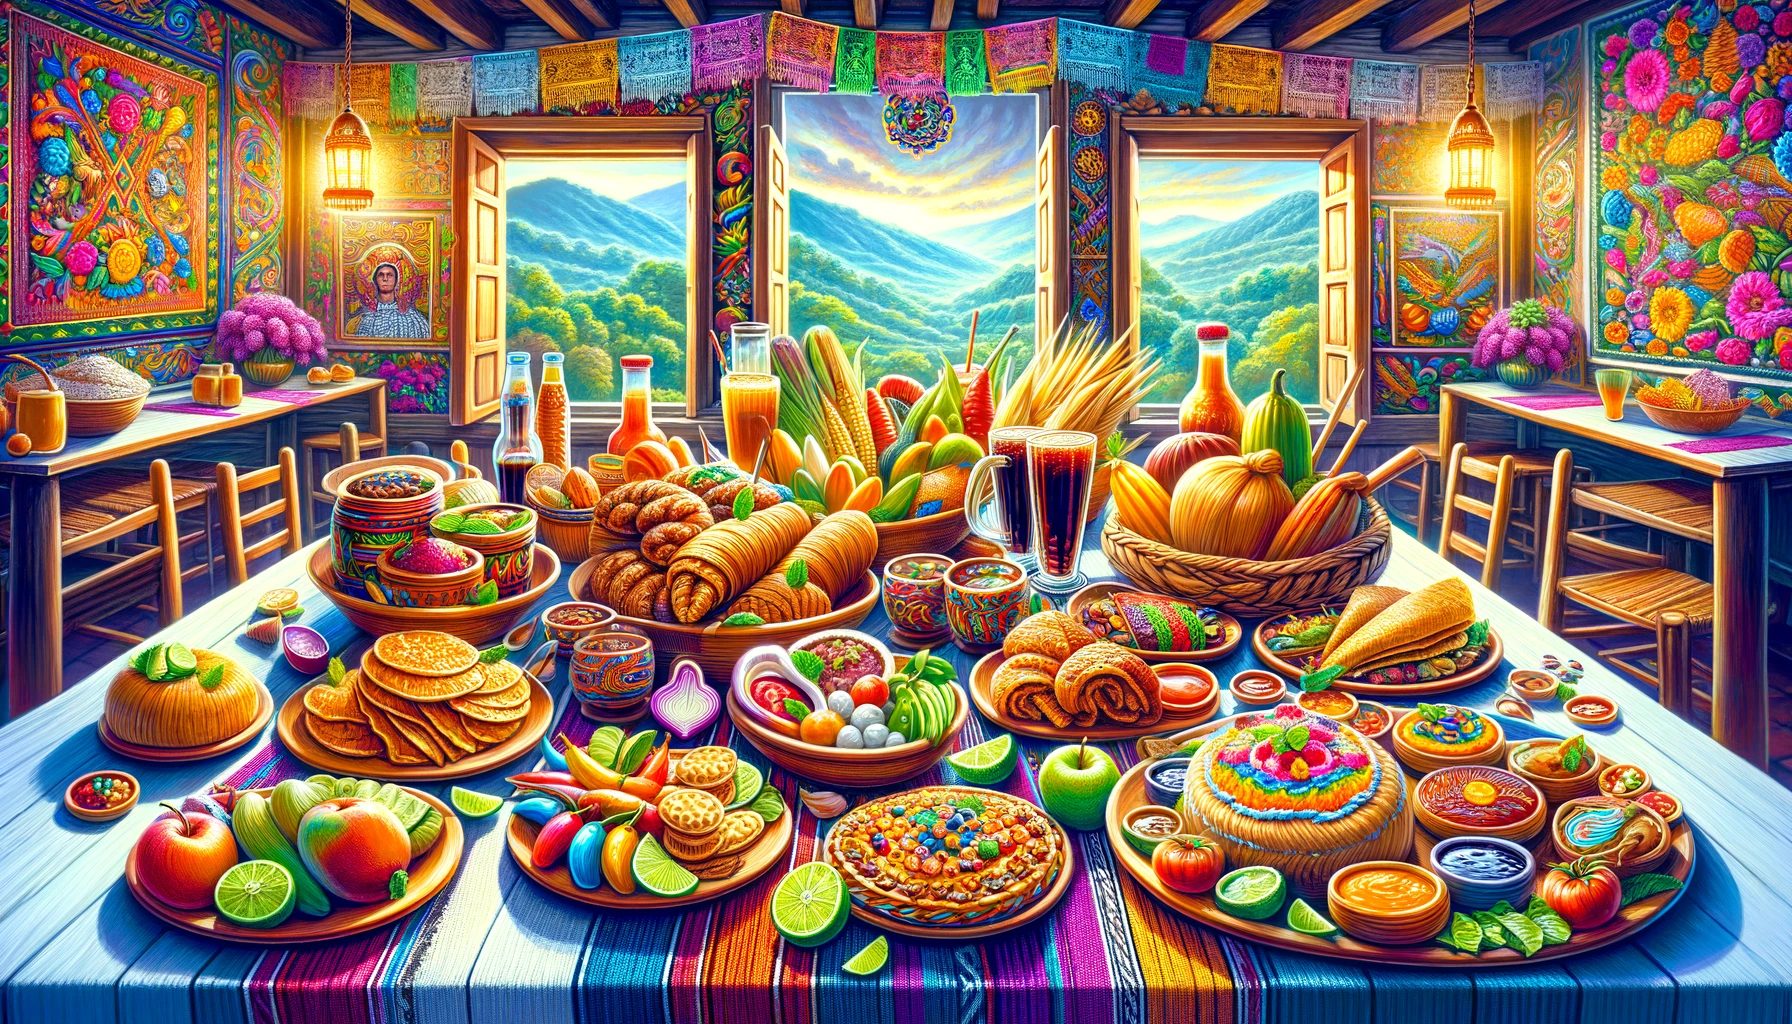 Colorful traditional feast, mountain view, vibrant interior decor.